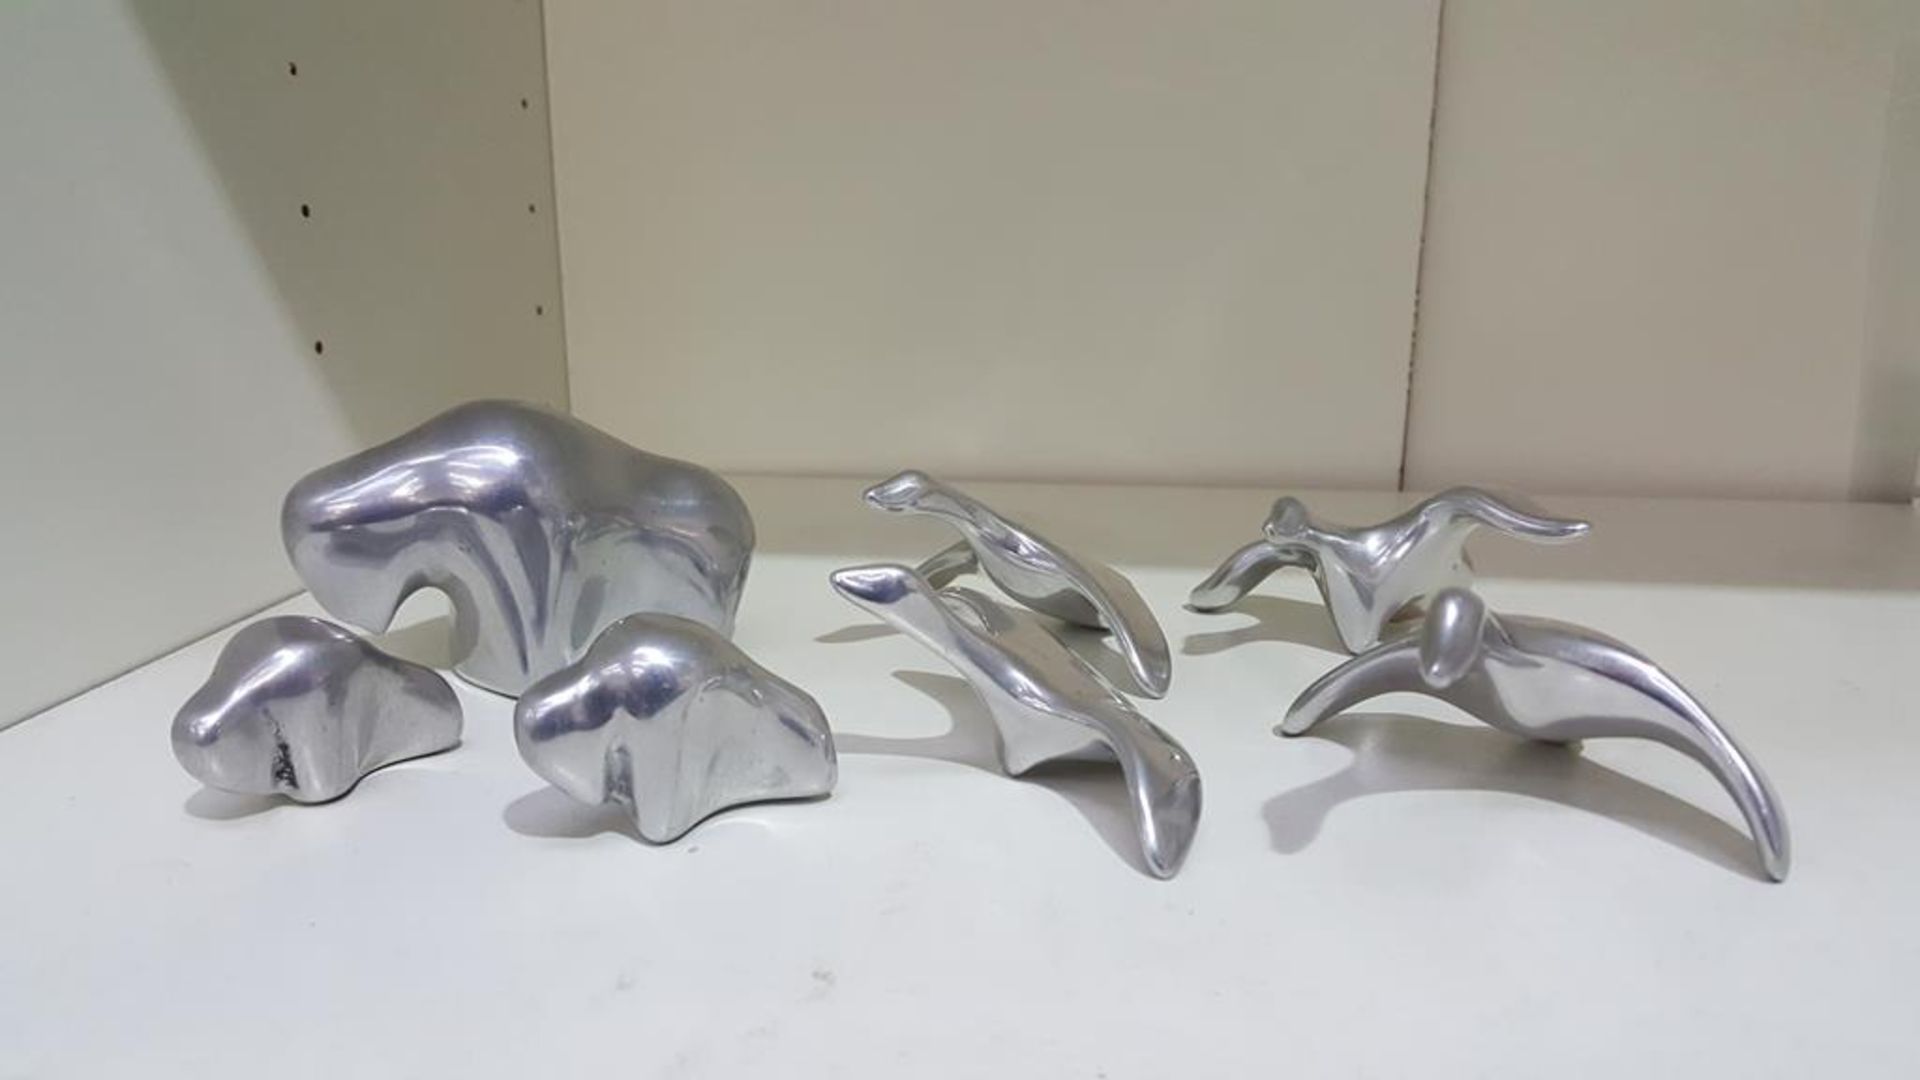 Seven Hoselton Stainless Steel Miniatures including Four Geese Figures and Three Buffalo Figures (